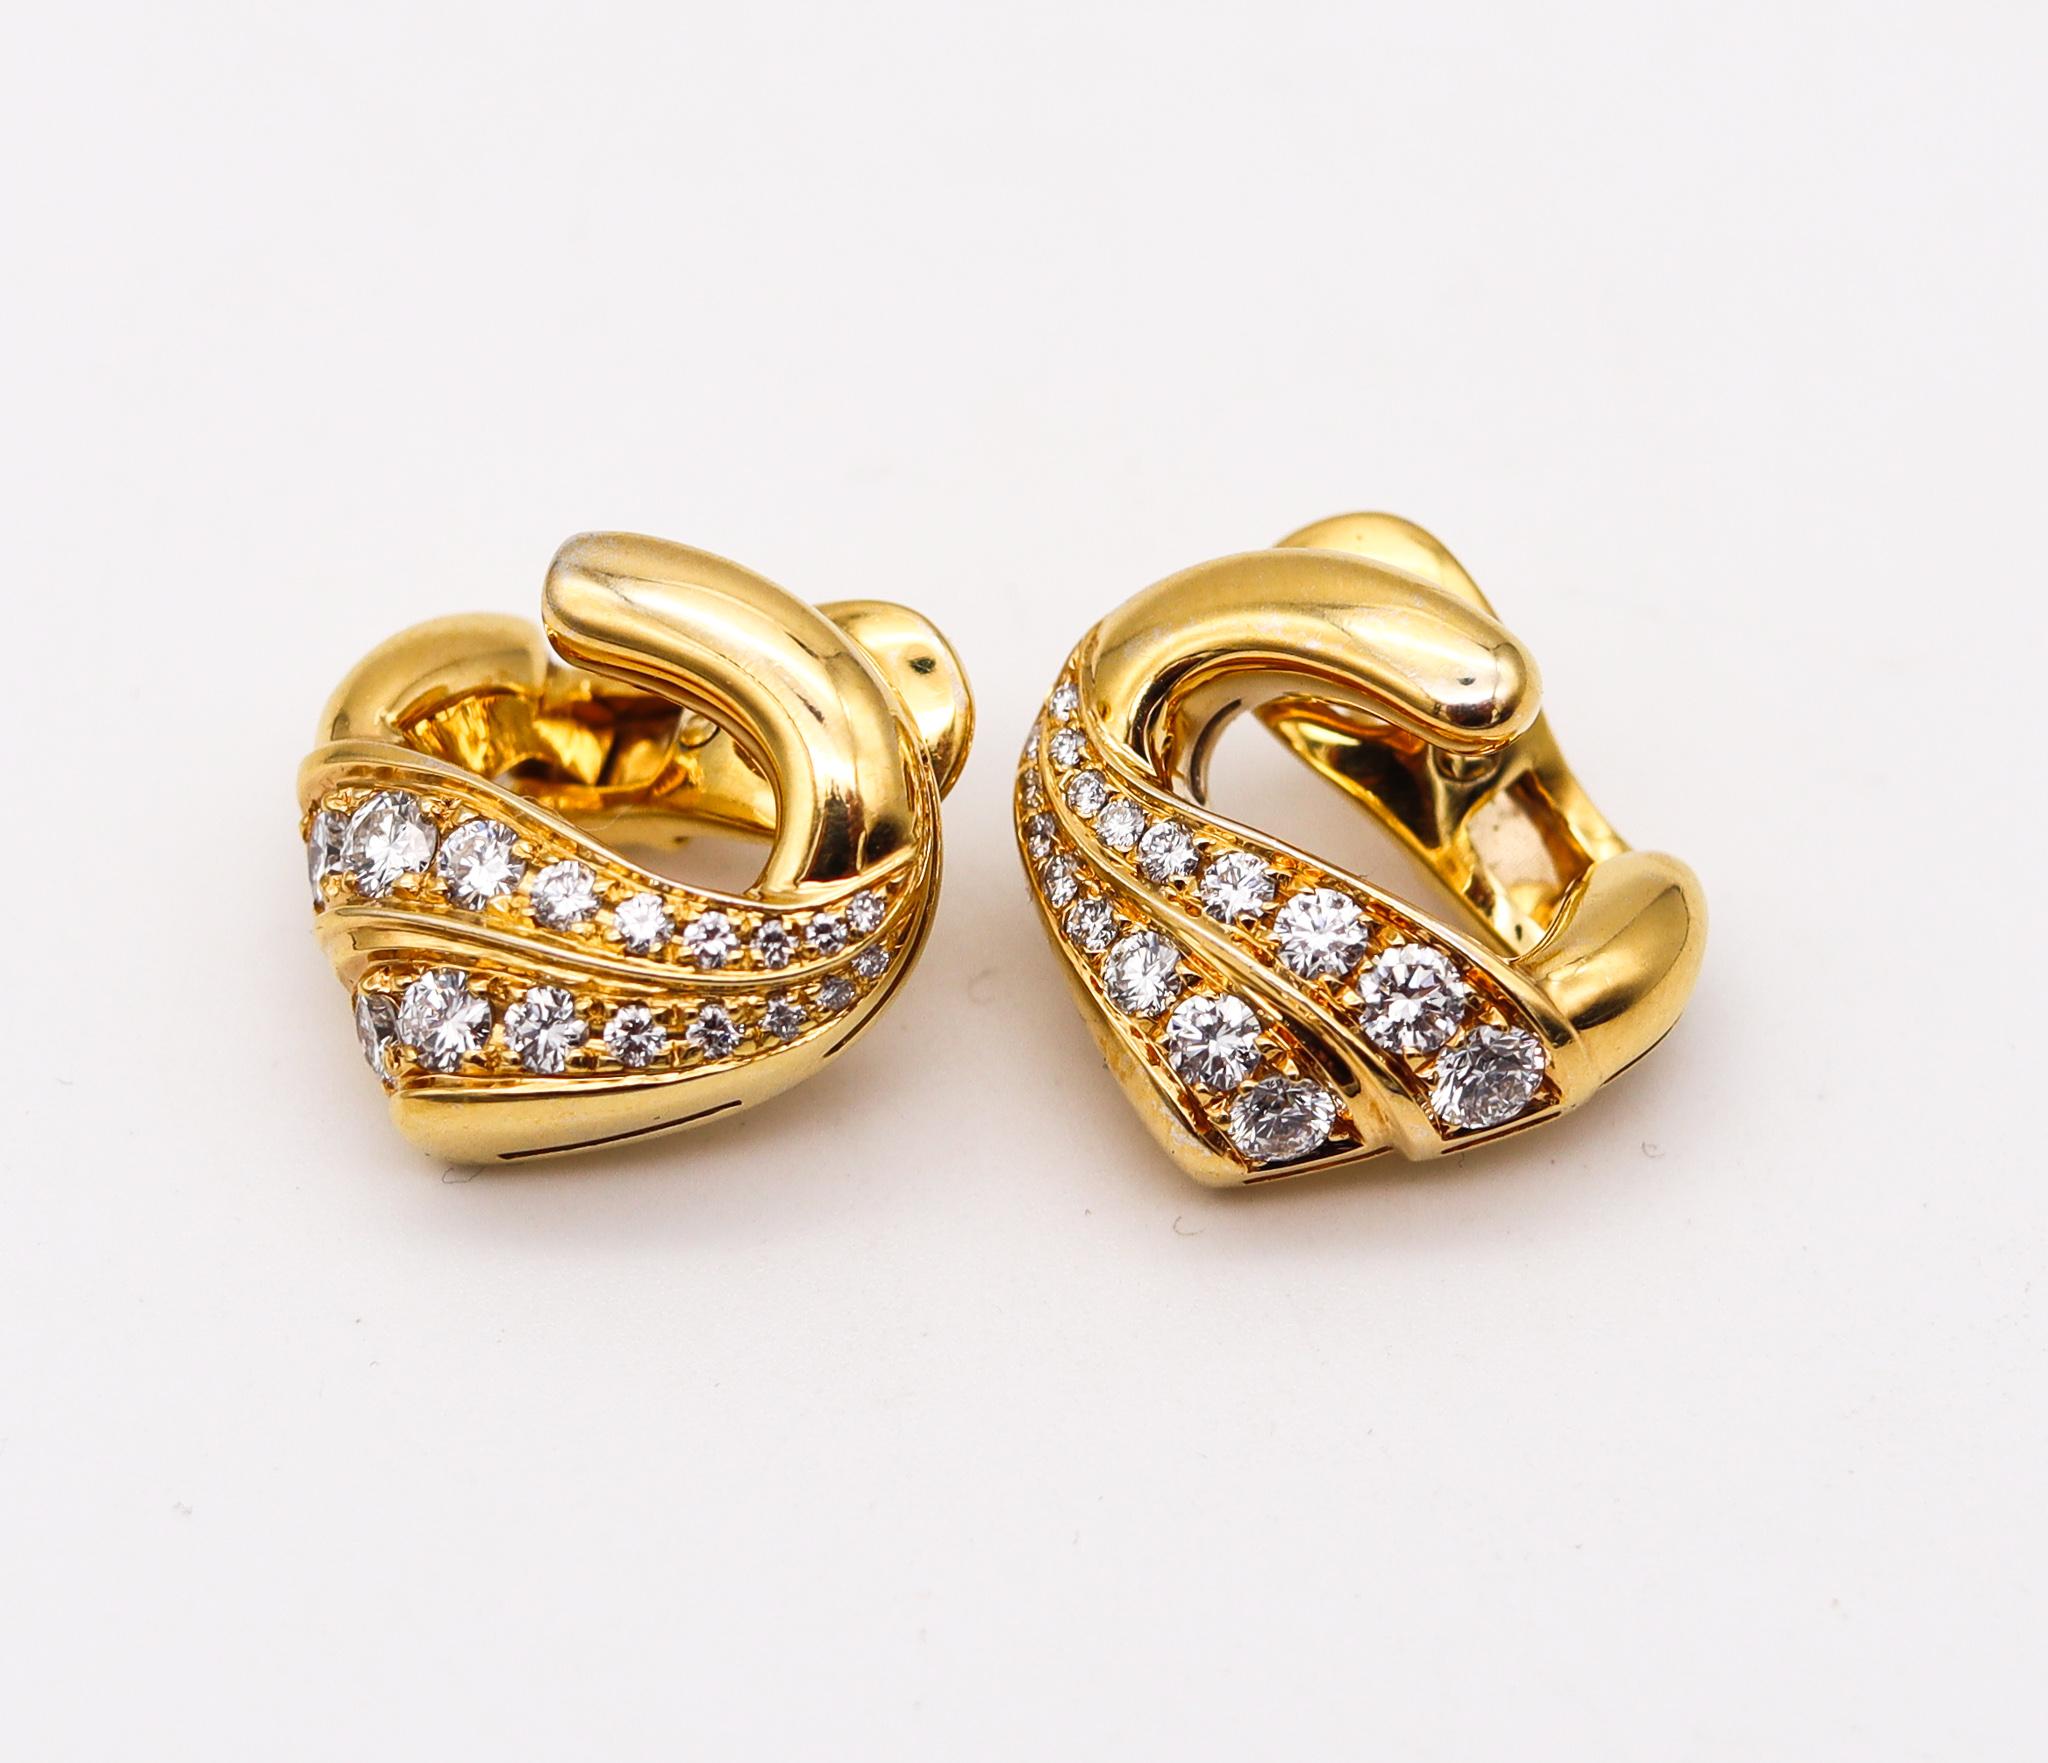 Brilliant Cut Bvlgari Roma Clips Earrings in 18Kt Yellow Gold with 1.76 Cts in VS Diamonds